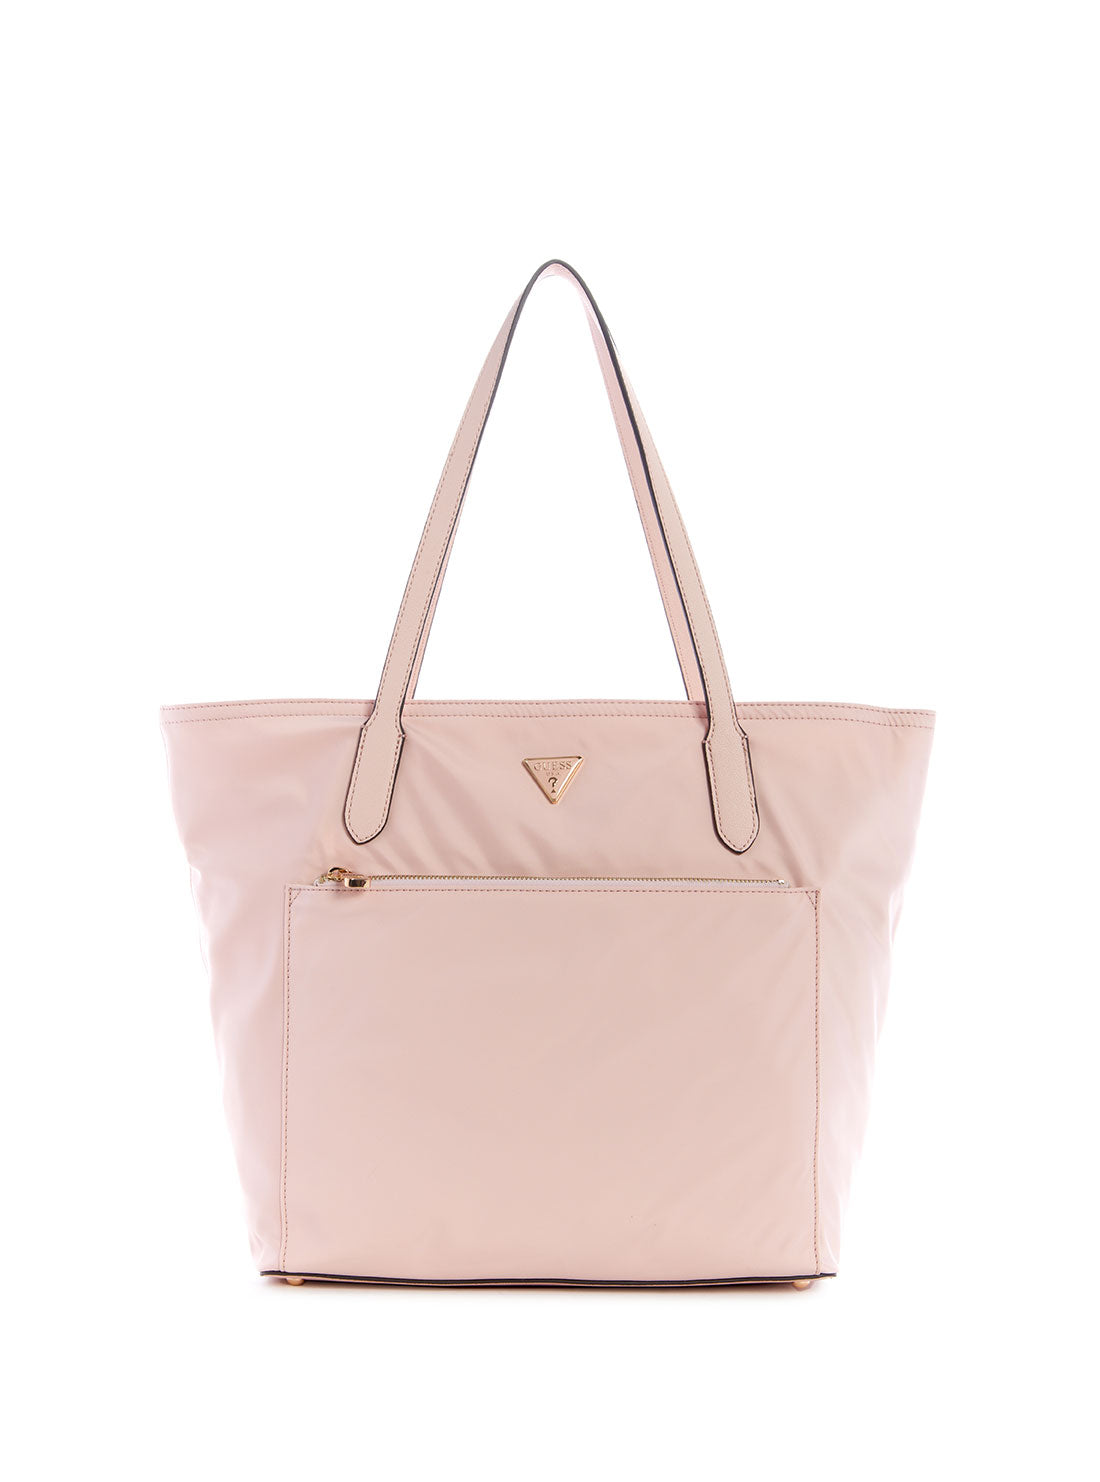 GUESS Women's Eco Pink Gemma Tote Bag EYG839523 Front View